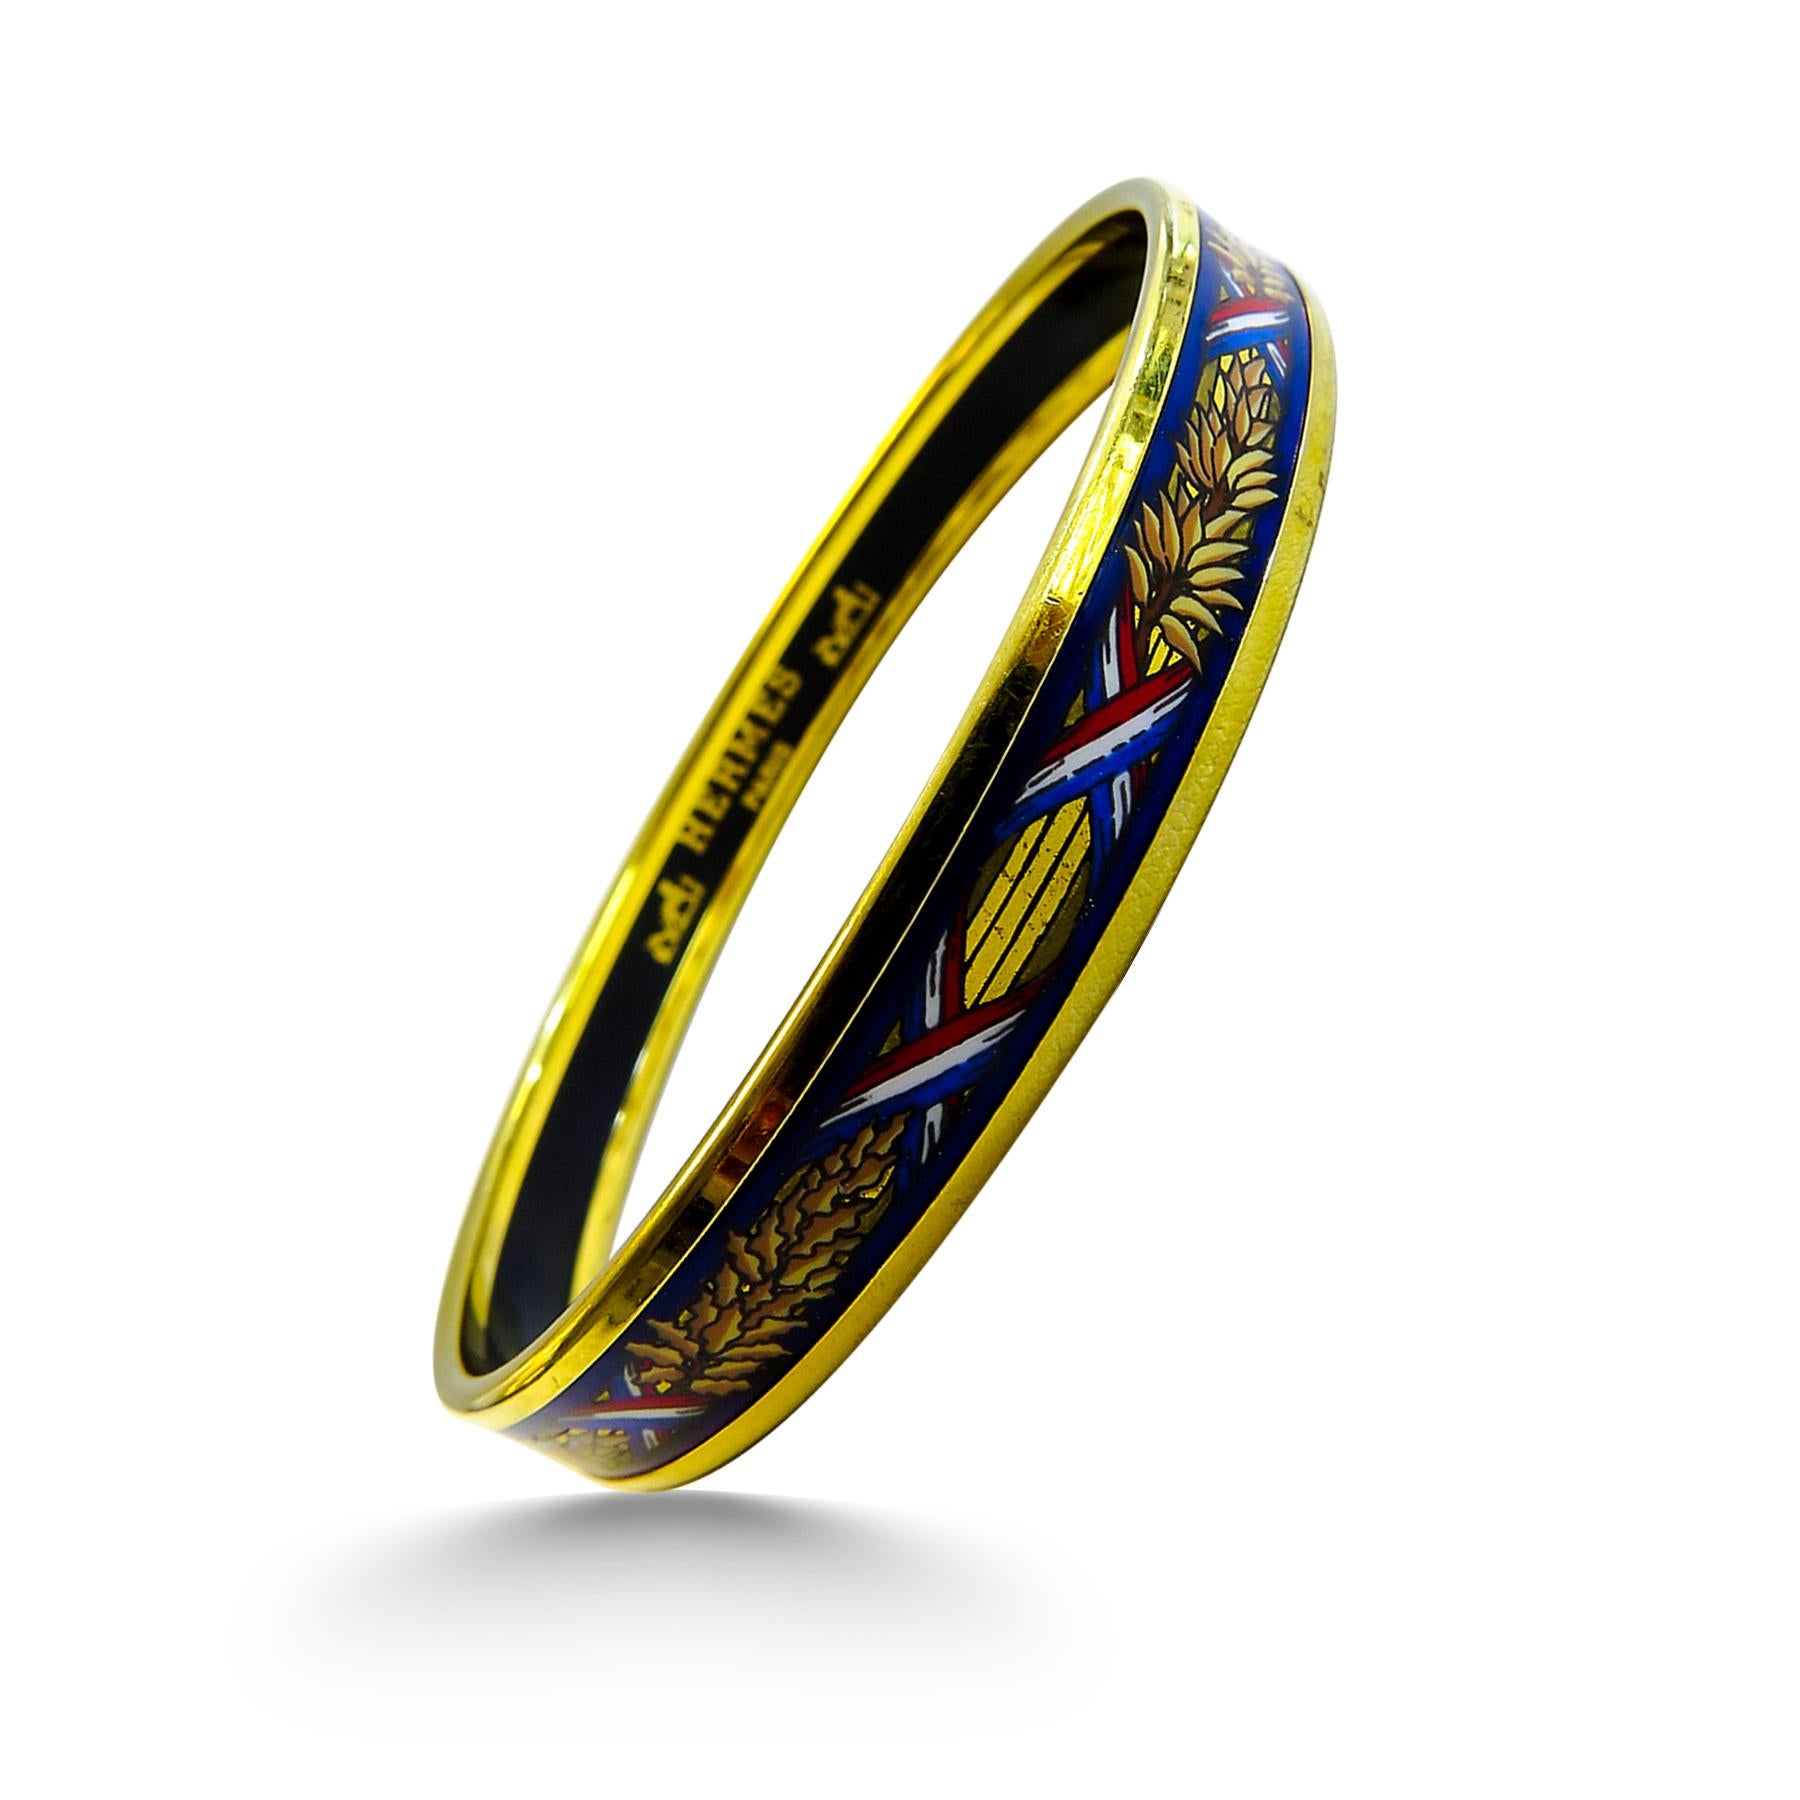 This Hermes bangle features an 18 Karat gold plated with a printed enamel. Carved in Austria, It weighs 20.5 grams, 10mm wide and has an inner diameter of 2.7 inches to give a comfortable fit in your wrist.

Condition: Good (sign of wear and minor